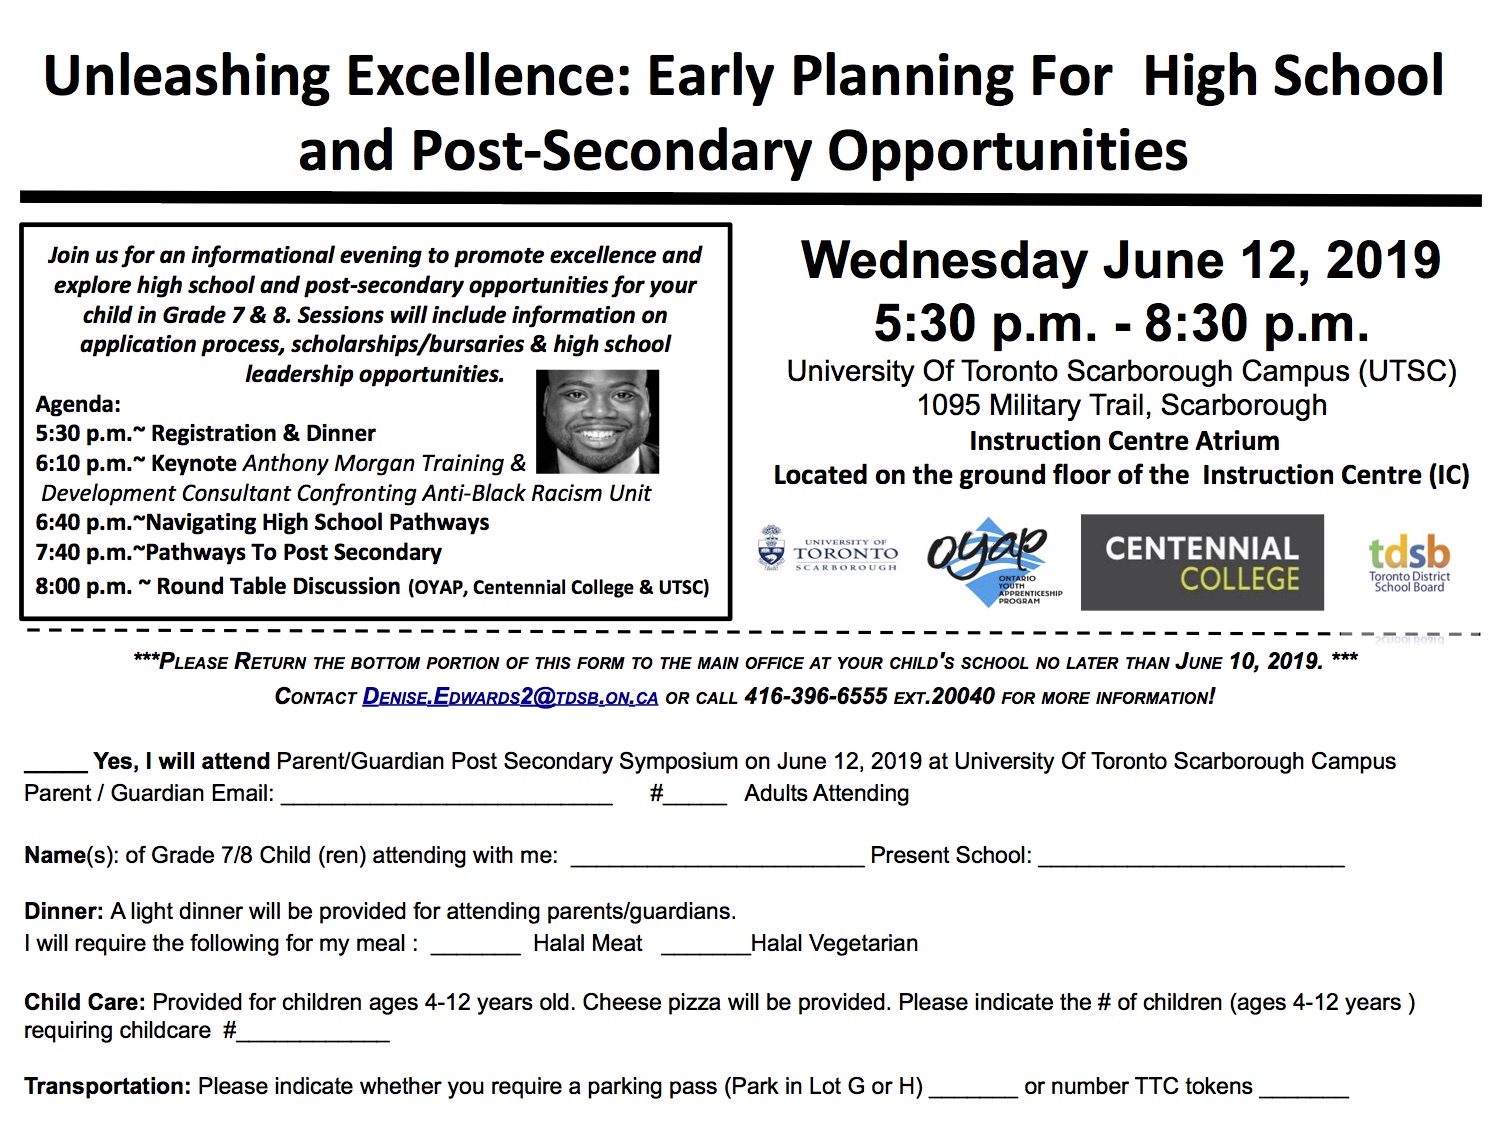 unleashing excellence flyer